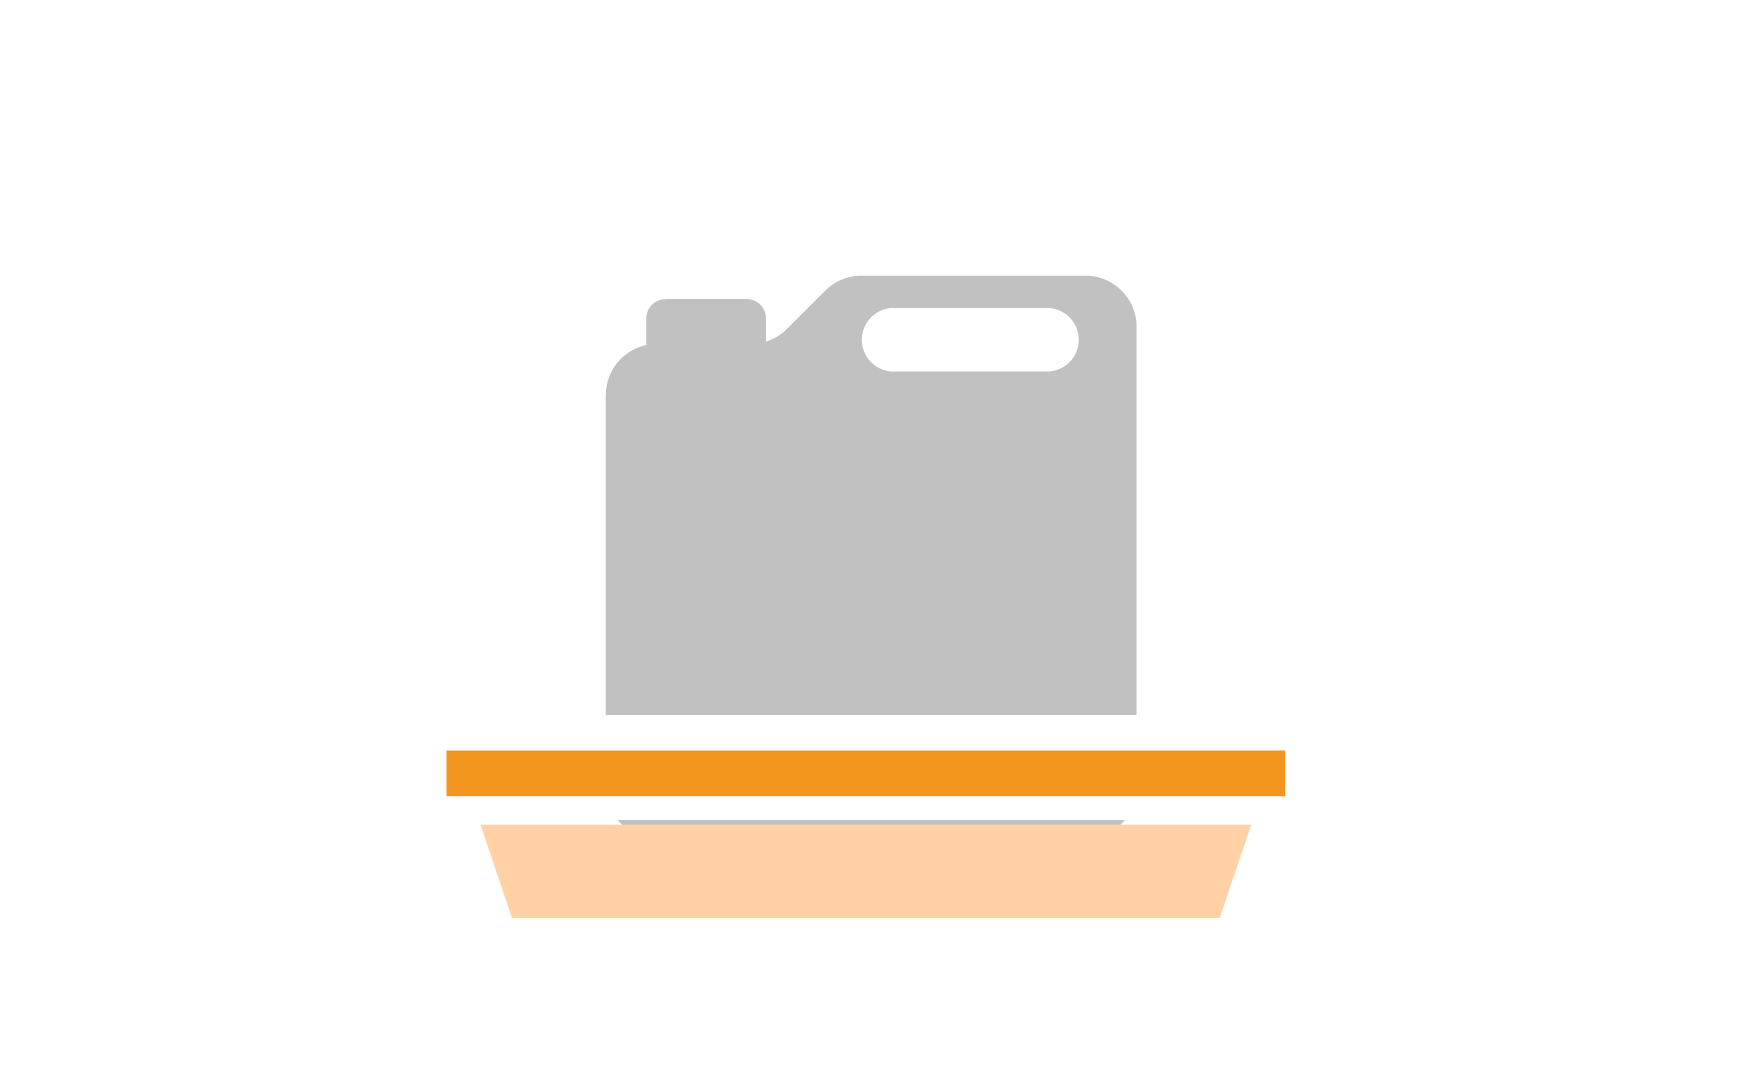 Illustration of a pesticide container on a dish tray